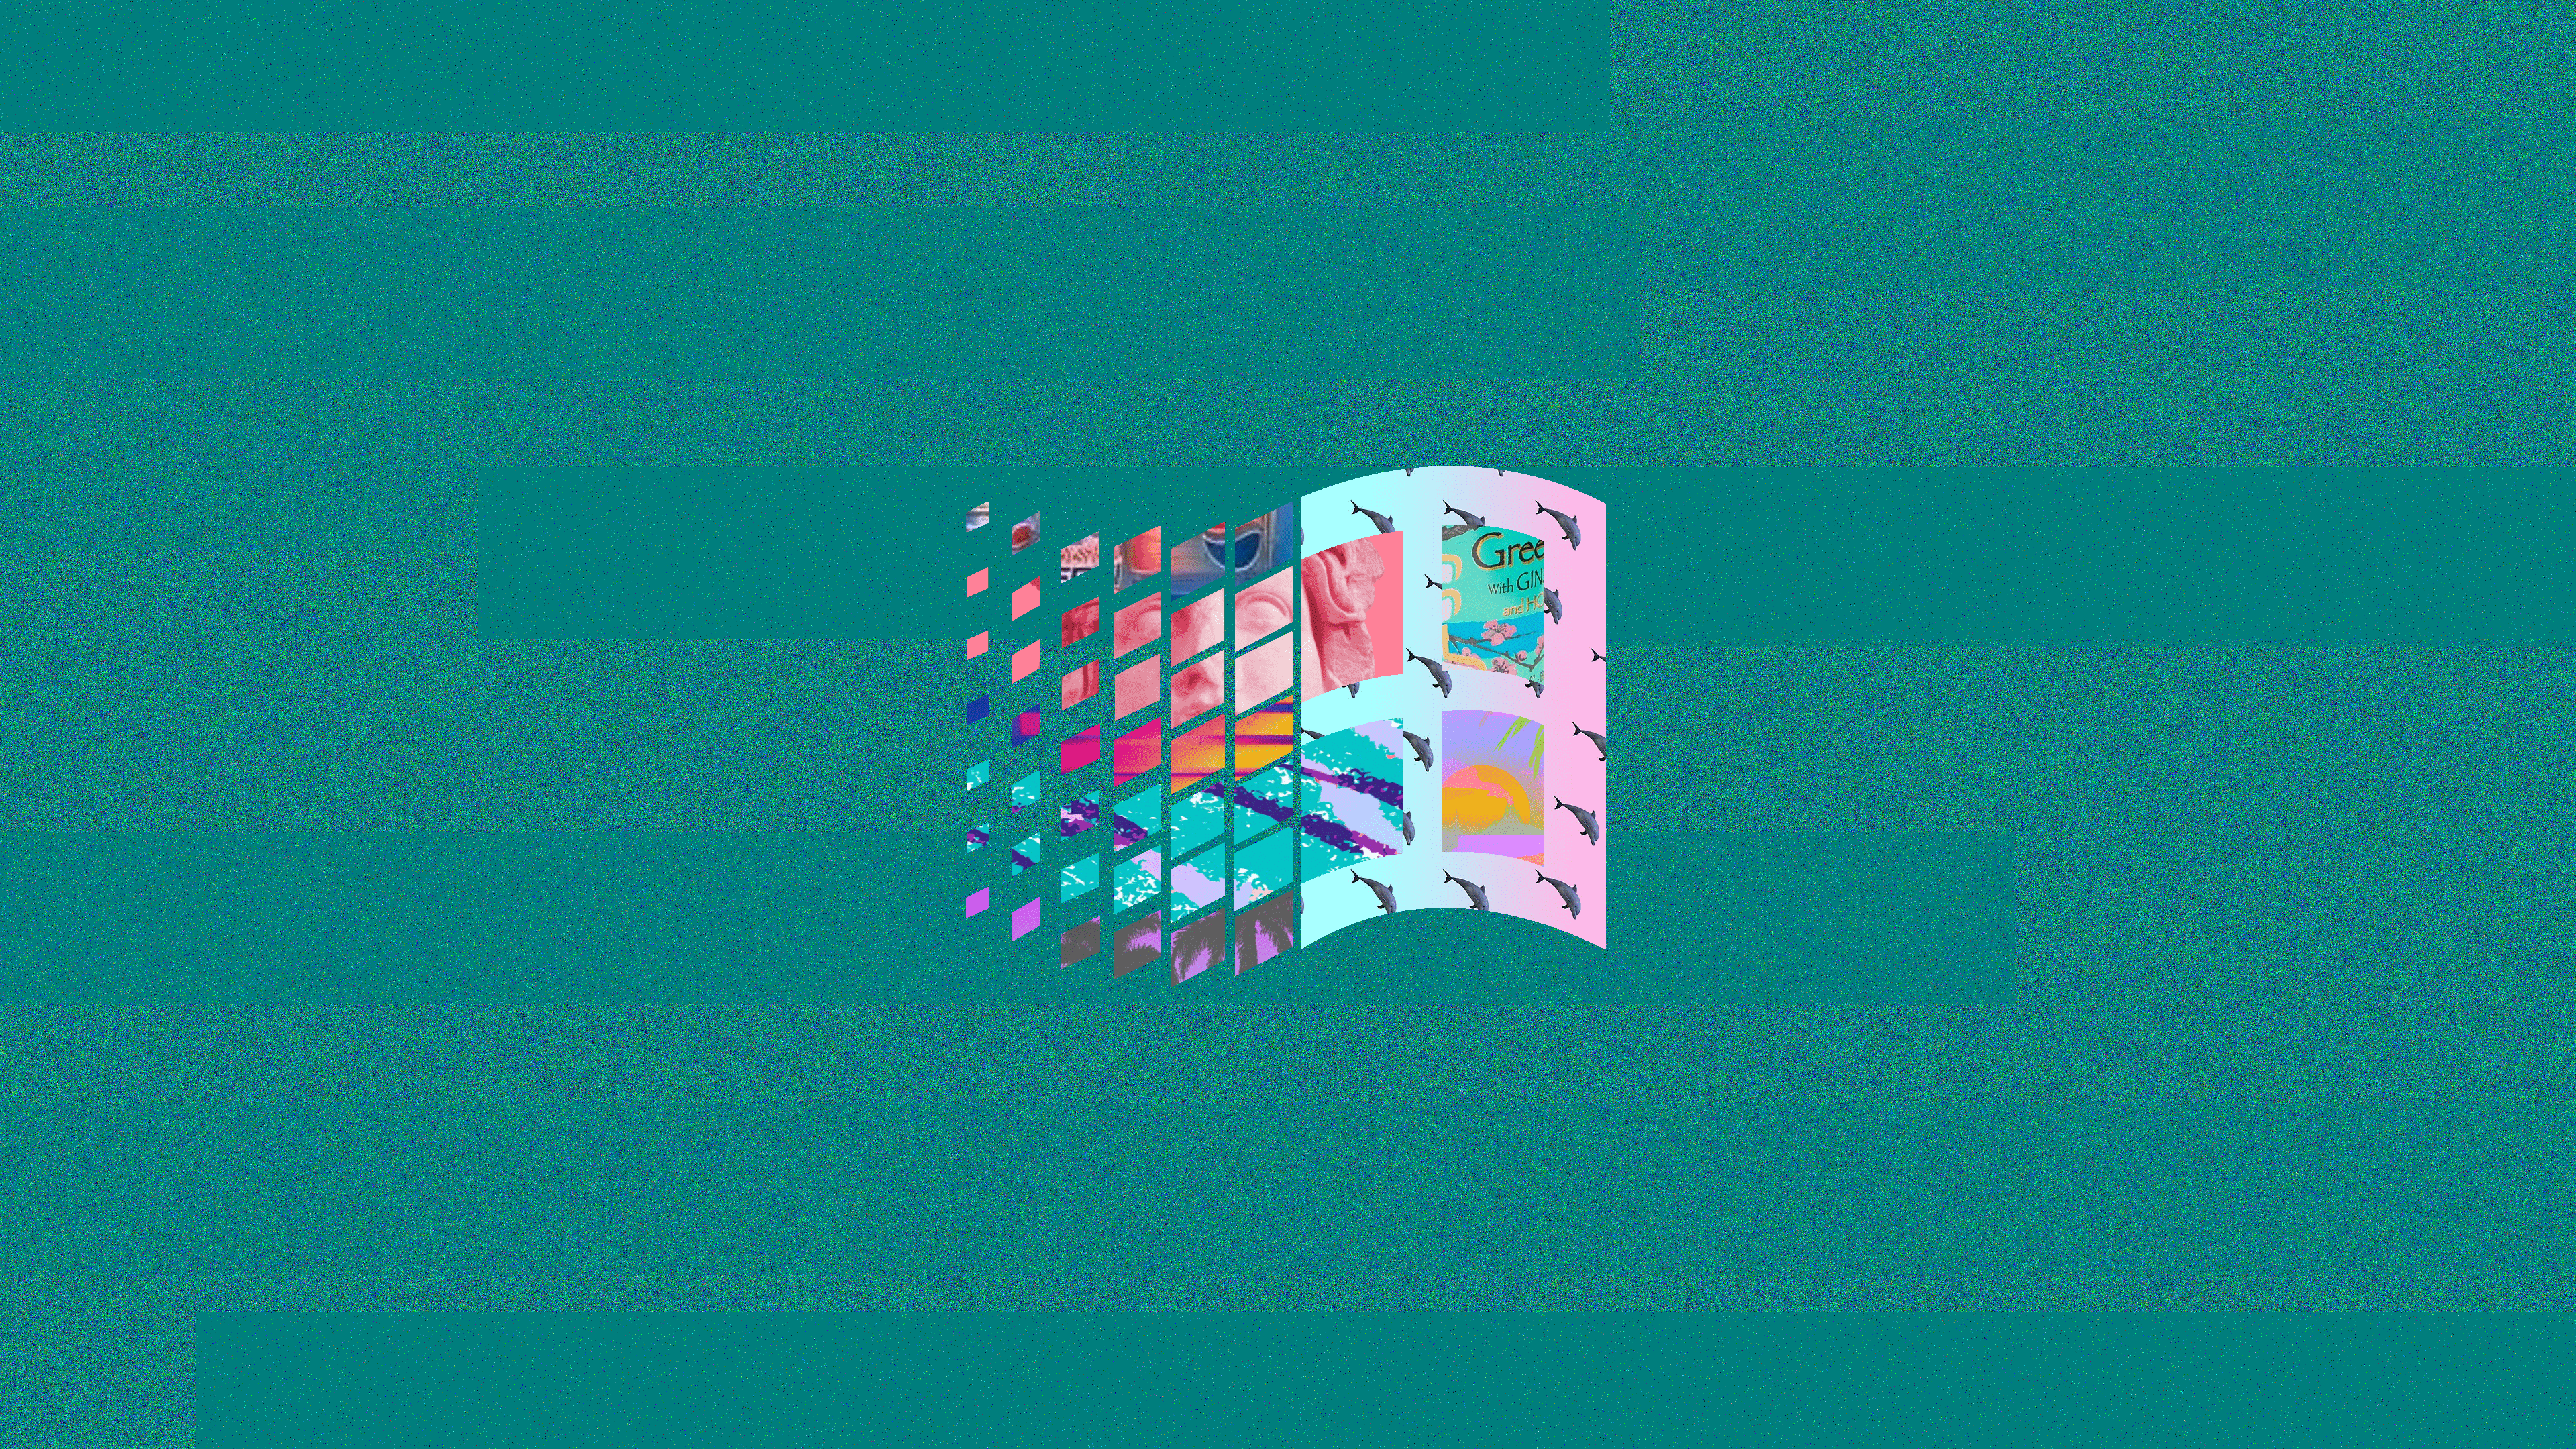 A colorful image of an abstract design - Windows 95, 90s